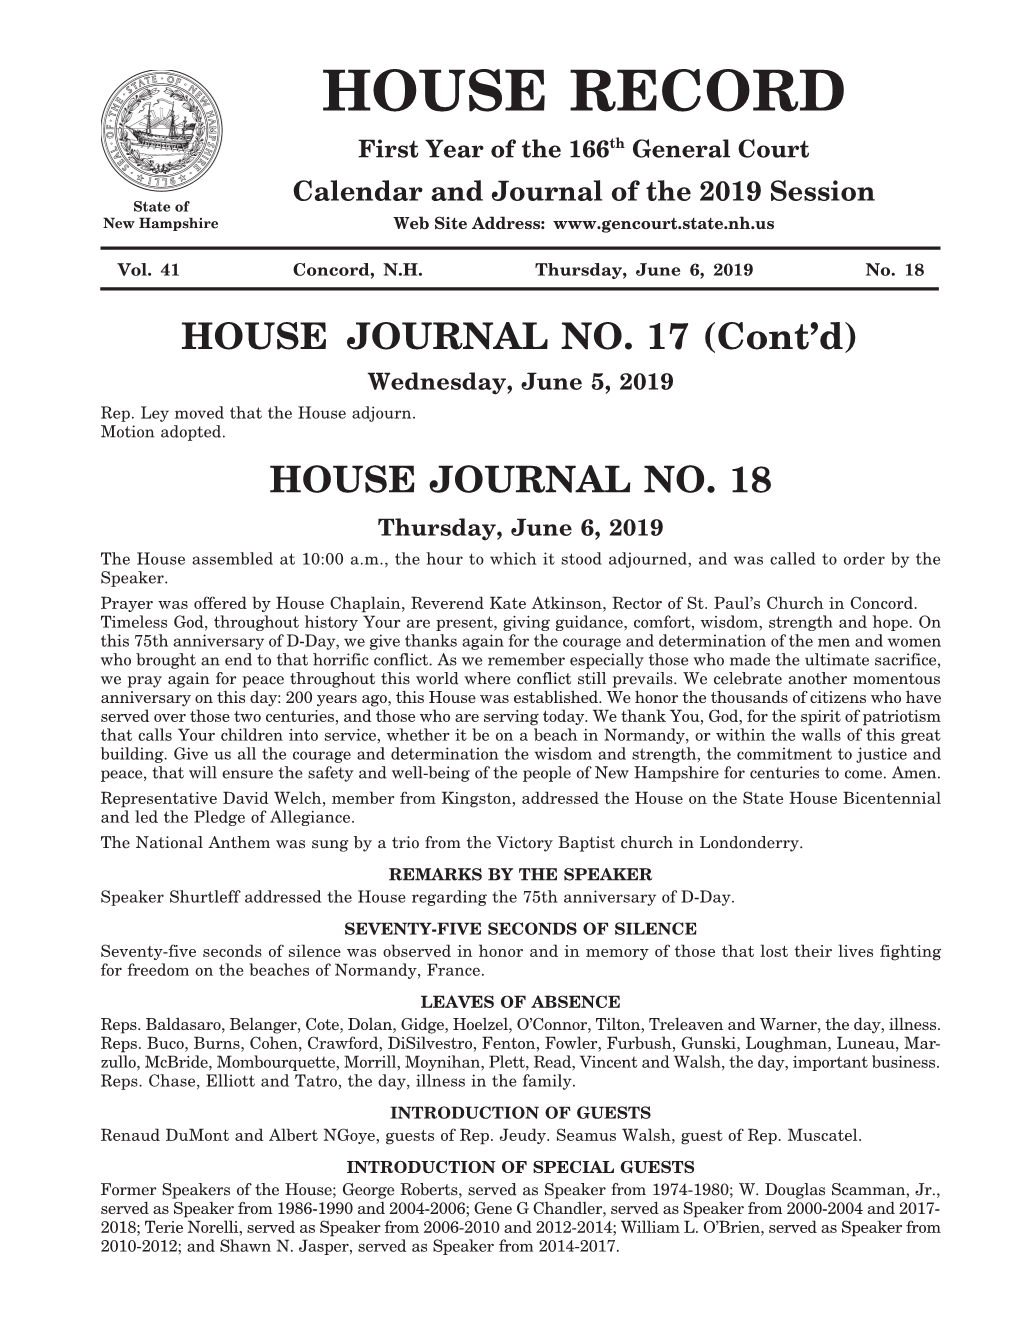 HOUSE JOURNAL NO. 17 (Cont’D) Wednesday, June 5, 2019 Rep